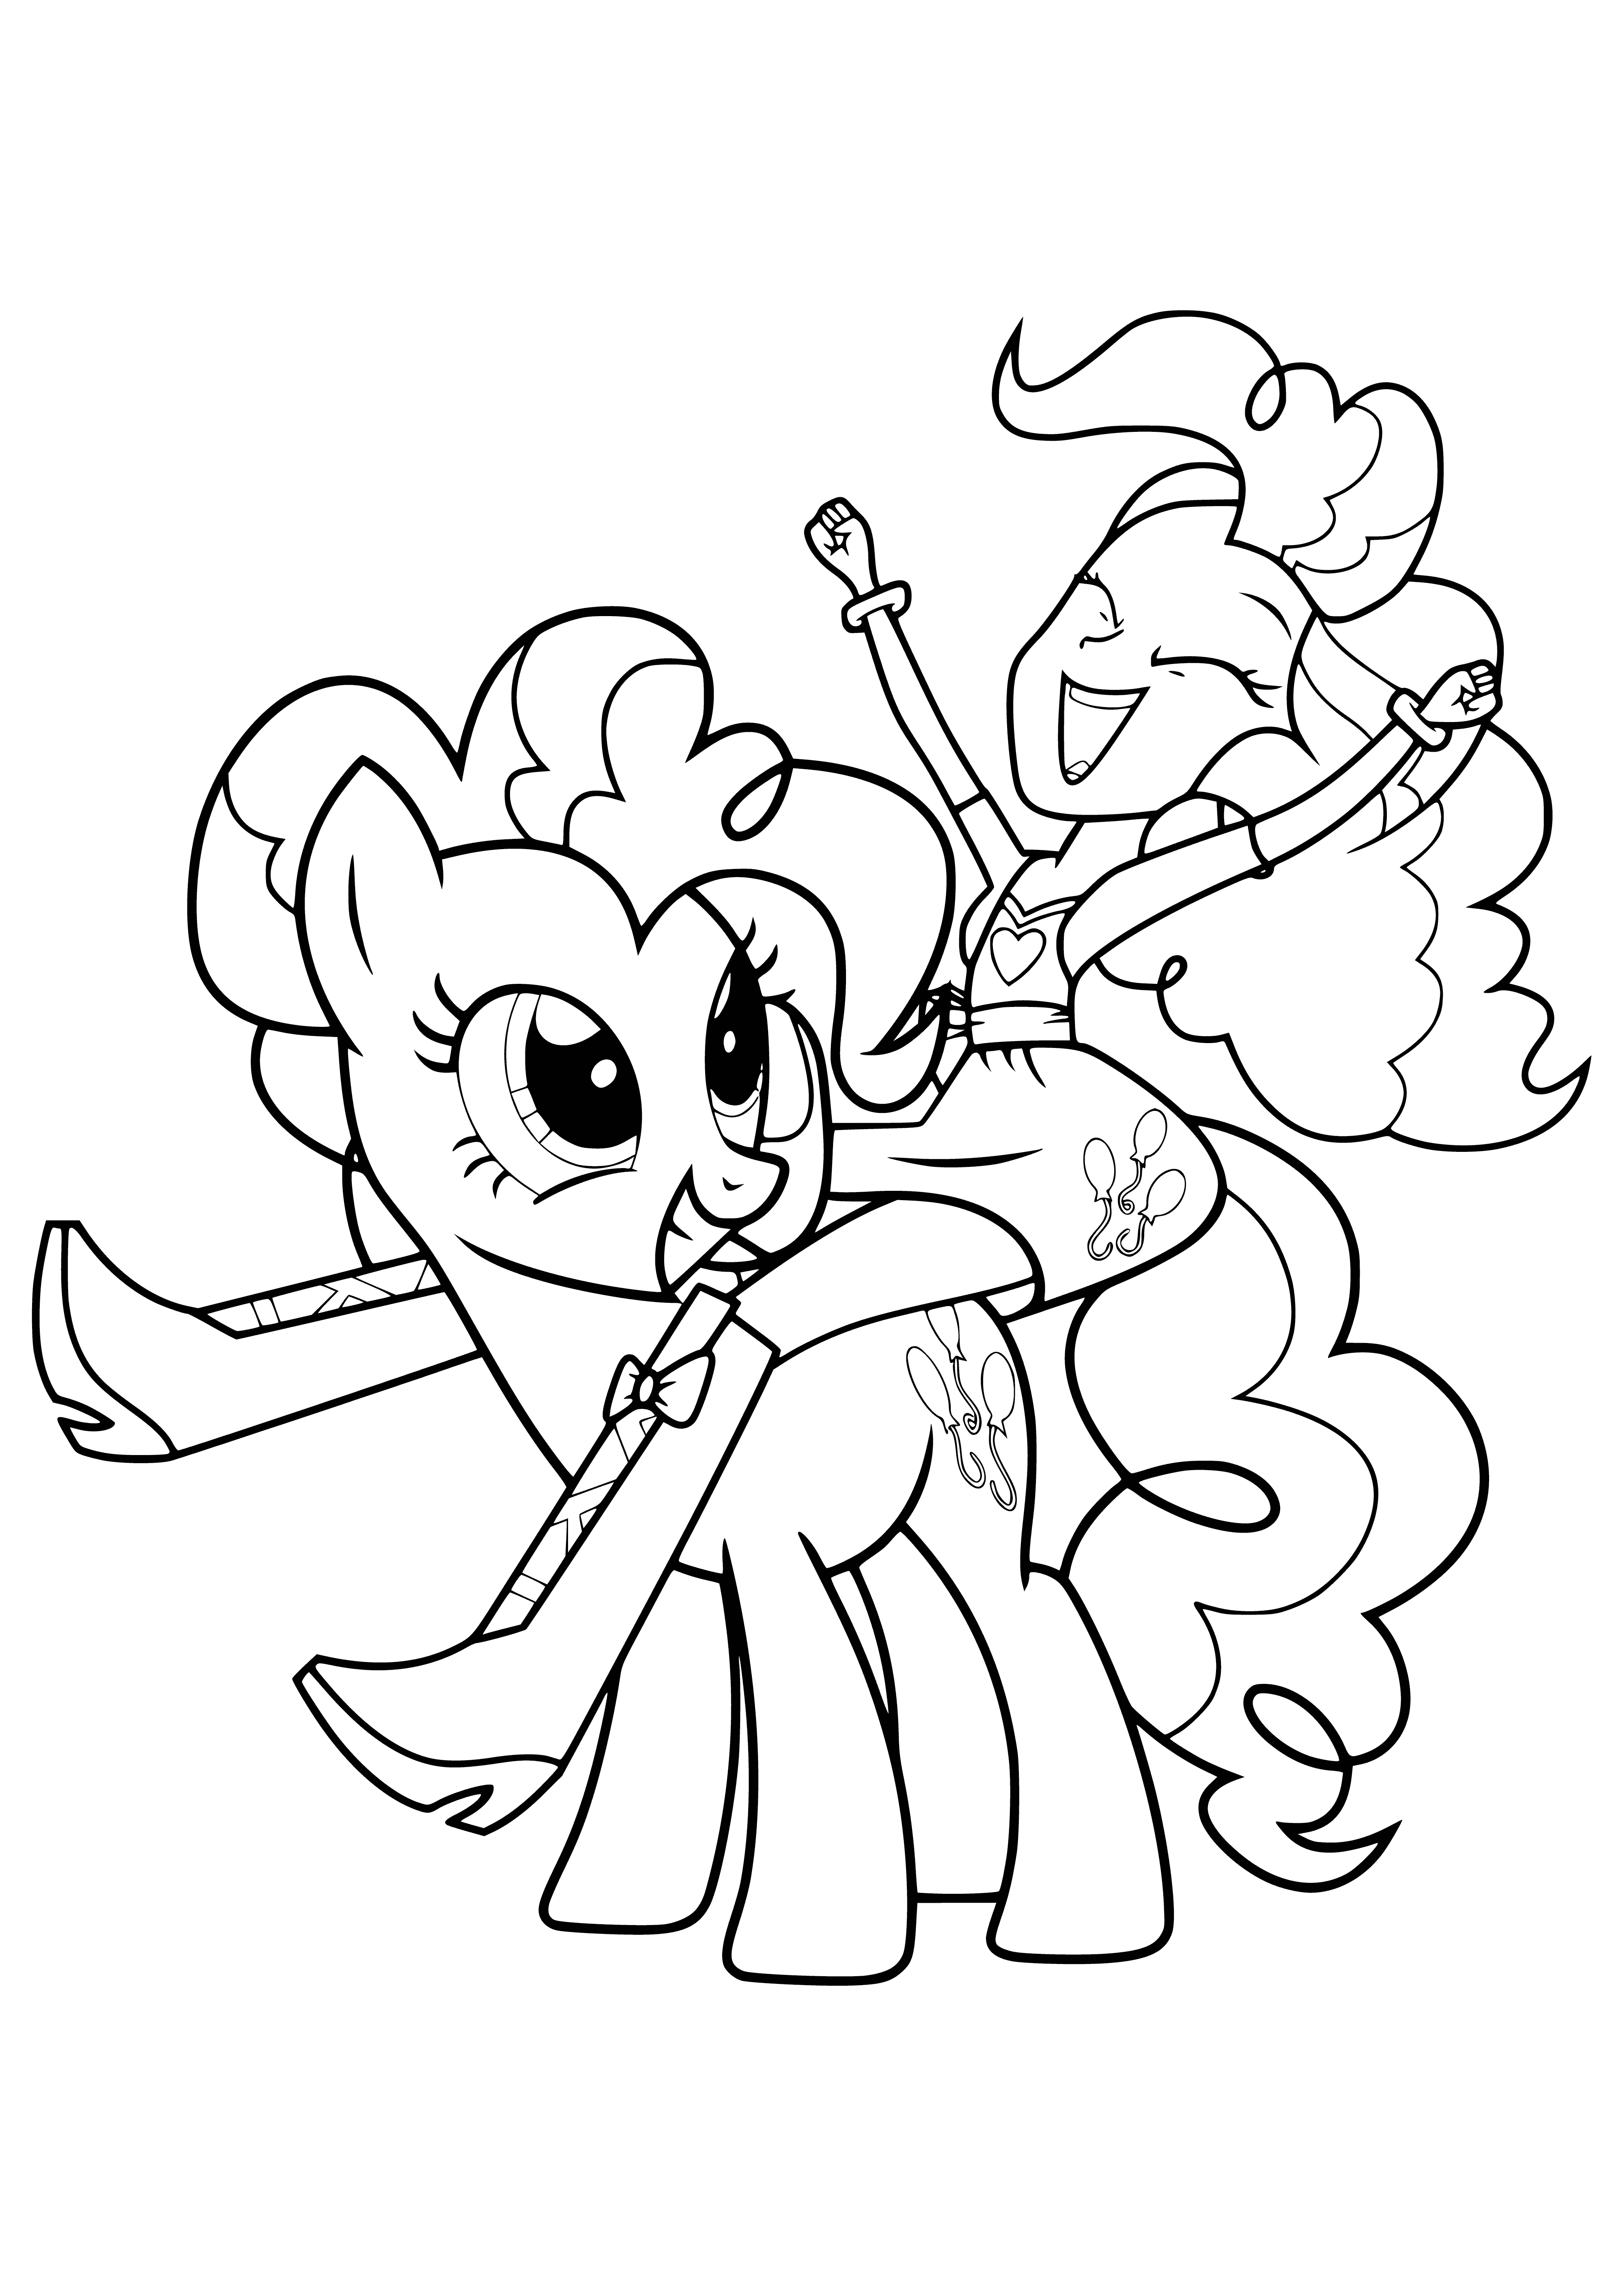 Pinky Pie Poney et Pinky Pie Fille coloriage